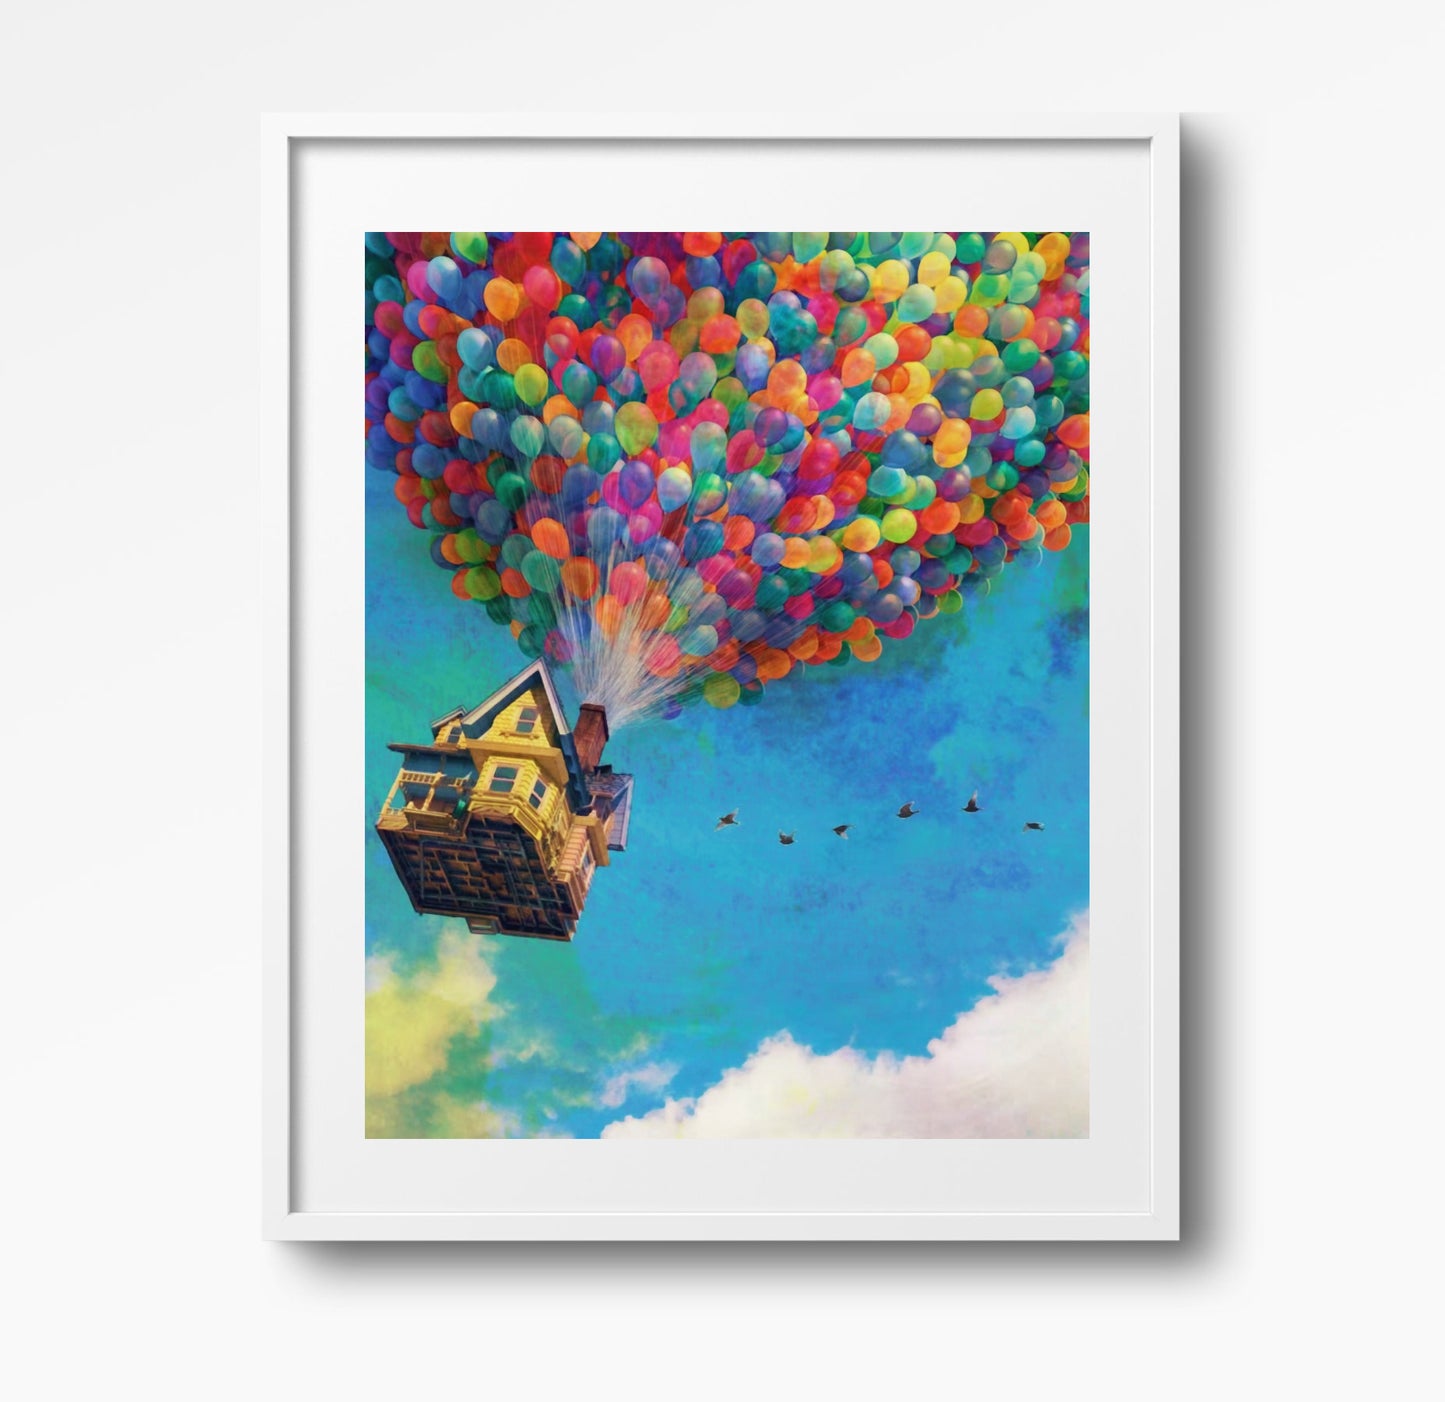 UP Balloon House Wall Art Print Painting Poster Canvas